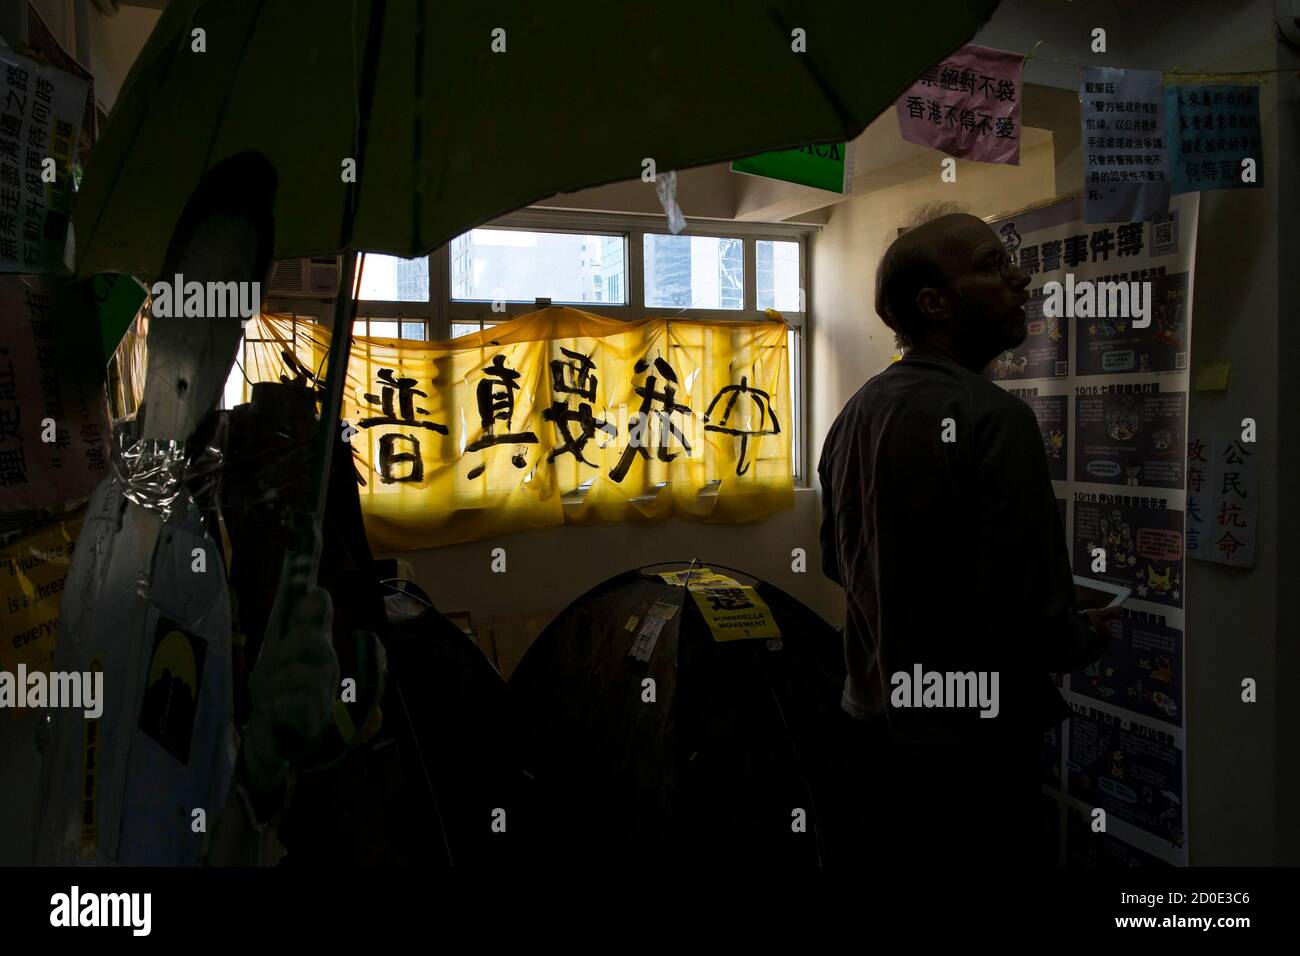 A protest banner reading 'I want real universal suffrage' collect from Occupy zone hangs on the window at a guesthouse in Hong Kong December 30, 2014. Set up in a small apartment in the Causeway Bay shopping district, the guesthouse that gives what it calls 'Umbrella Revolution Occupation Experience' charges guest HK$100 (US$13) a night to stay in a tent surrounded by pro-democracy banners, a cardboard cutout of Chinese President Xi Jinping holding a yellow umbrella, and serve with toilet paper printed with the face of embattled leader of Hong Kong chief executive Leung Chun-ying. REUTERS/Tyro Stock Photo